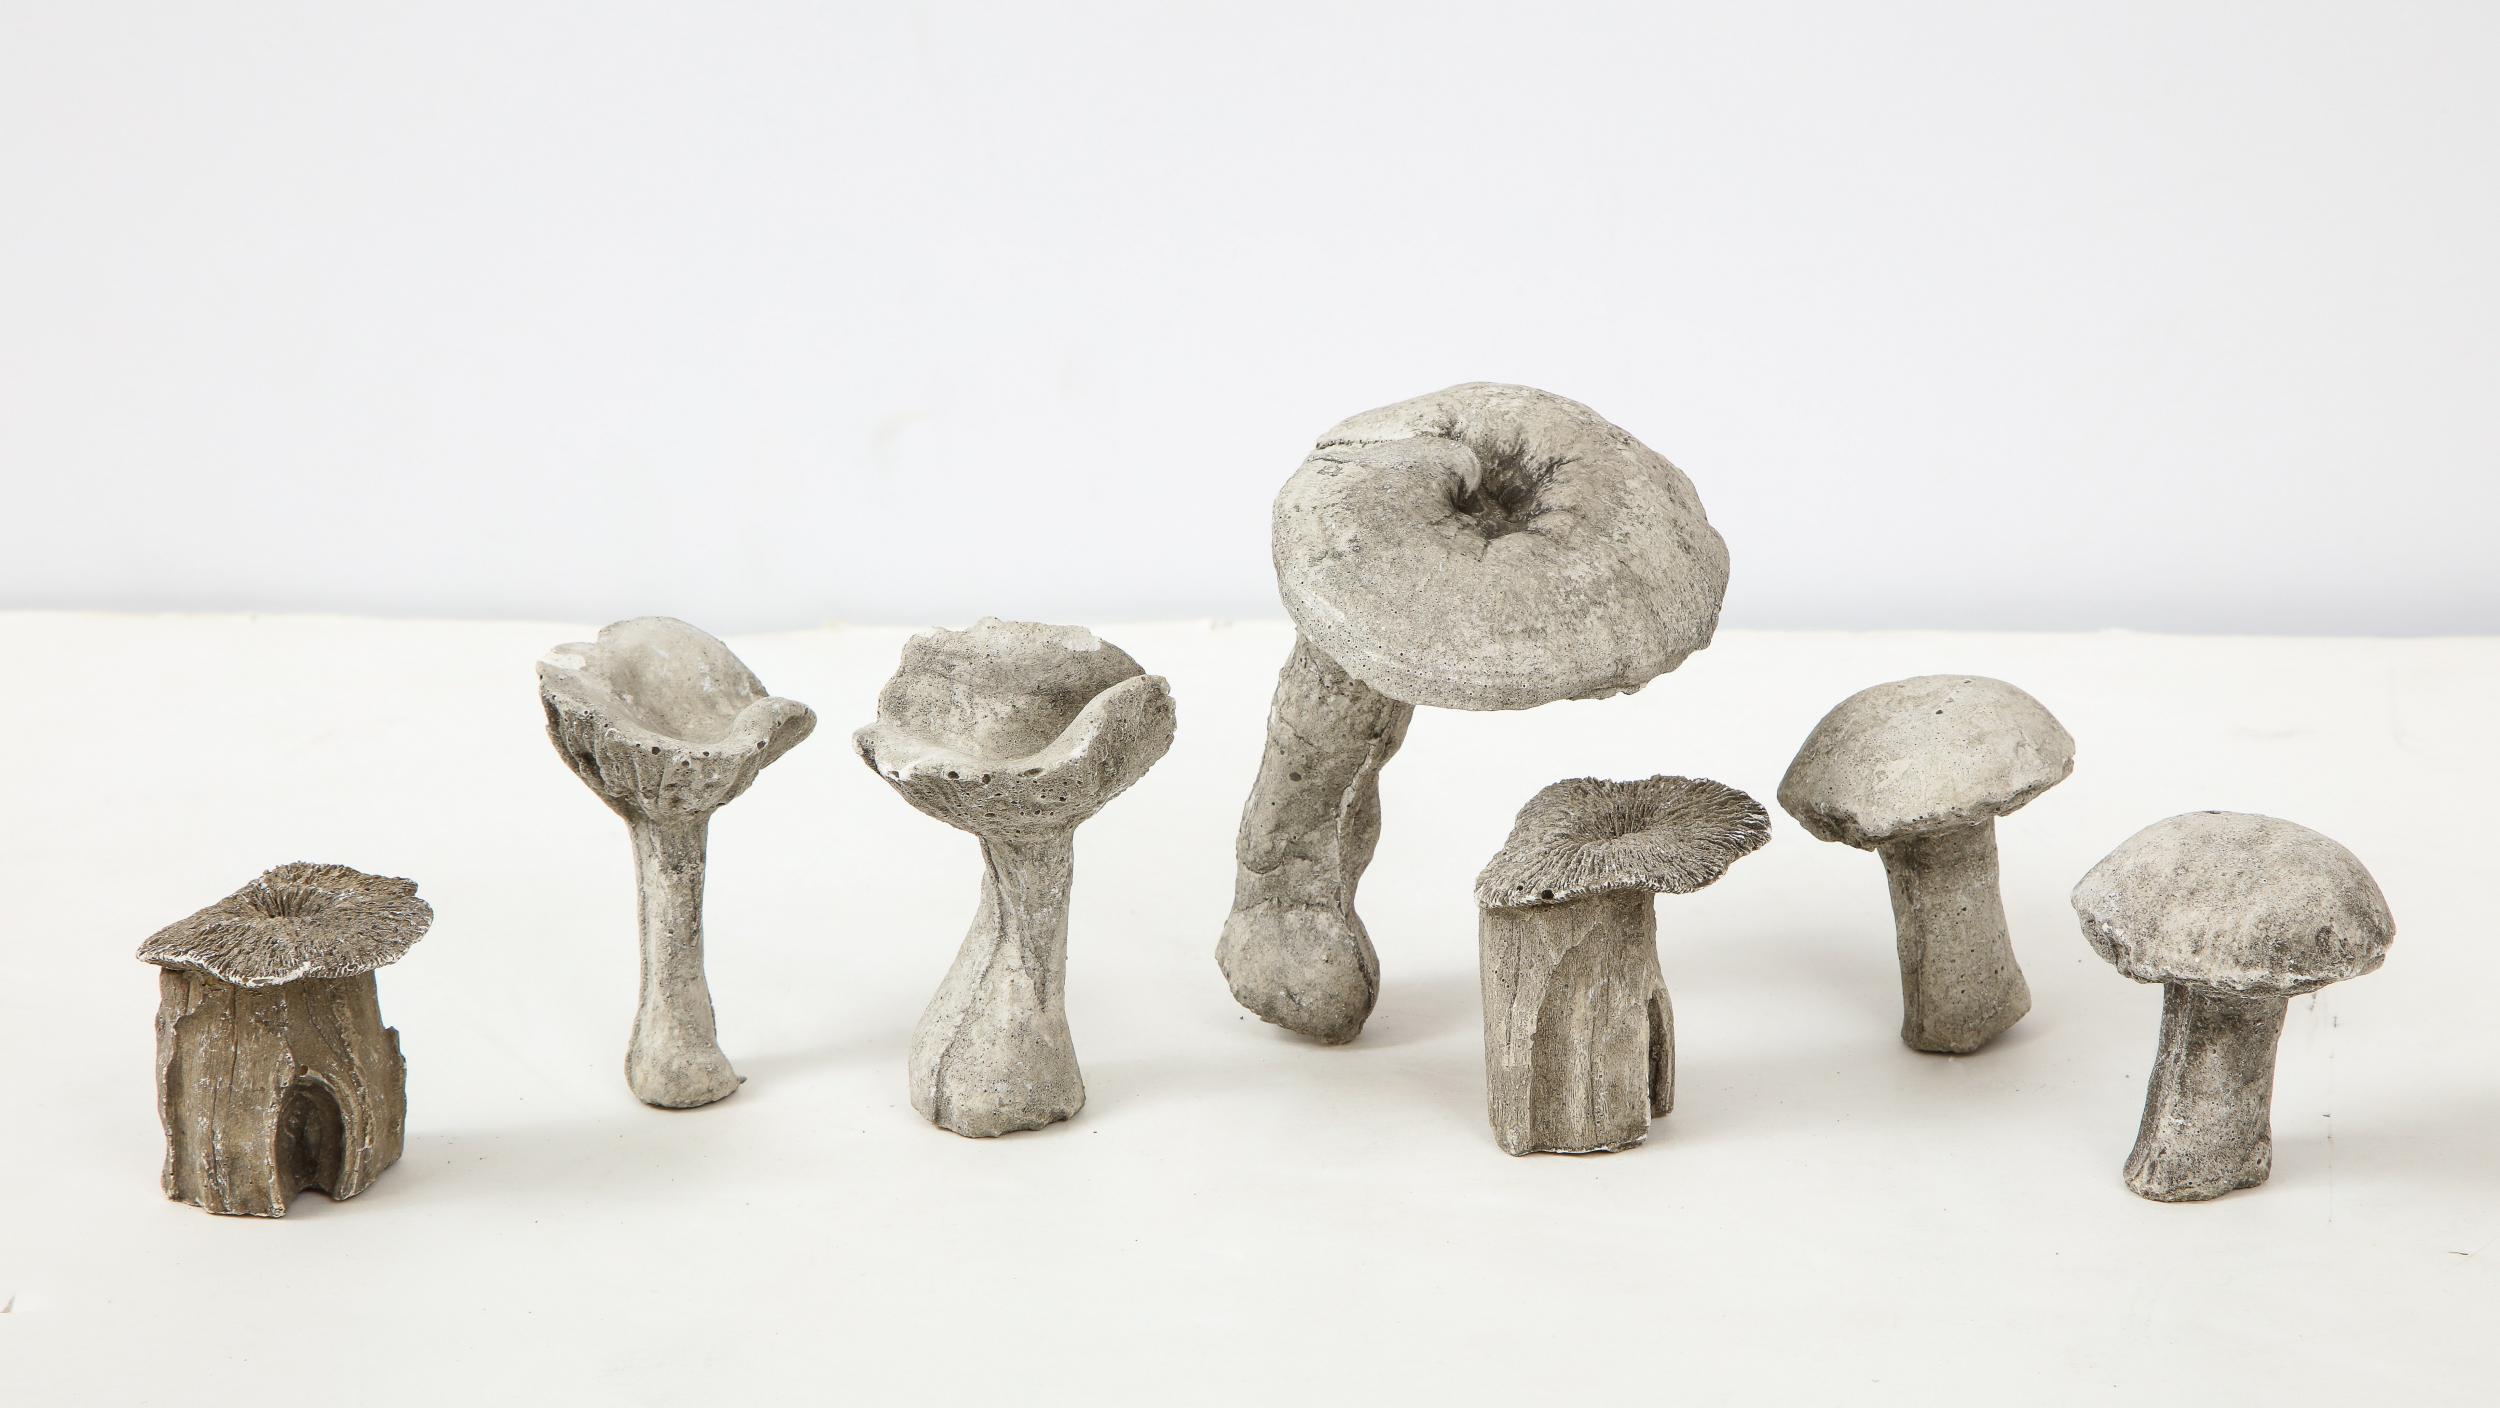 Set of seven small garden mushrooms on spikes for the garden, found in England. Made from molded concrete, they are each unique in size and shape. The tallest is four and a half inches tall and four inches wide. The smallest is two inches high and